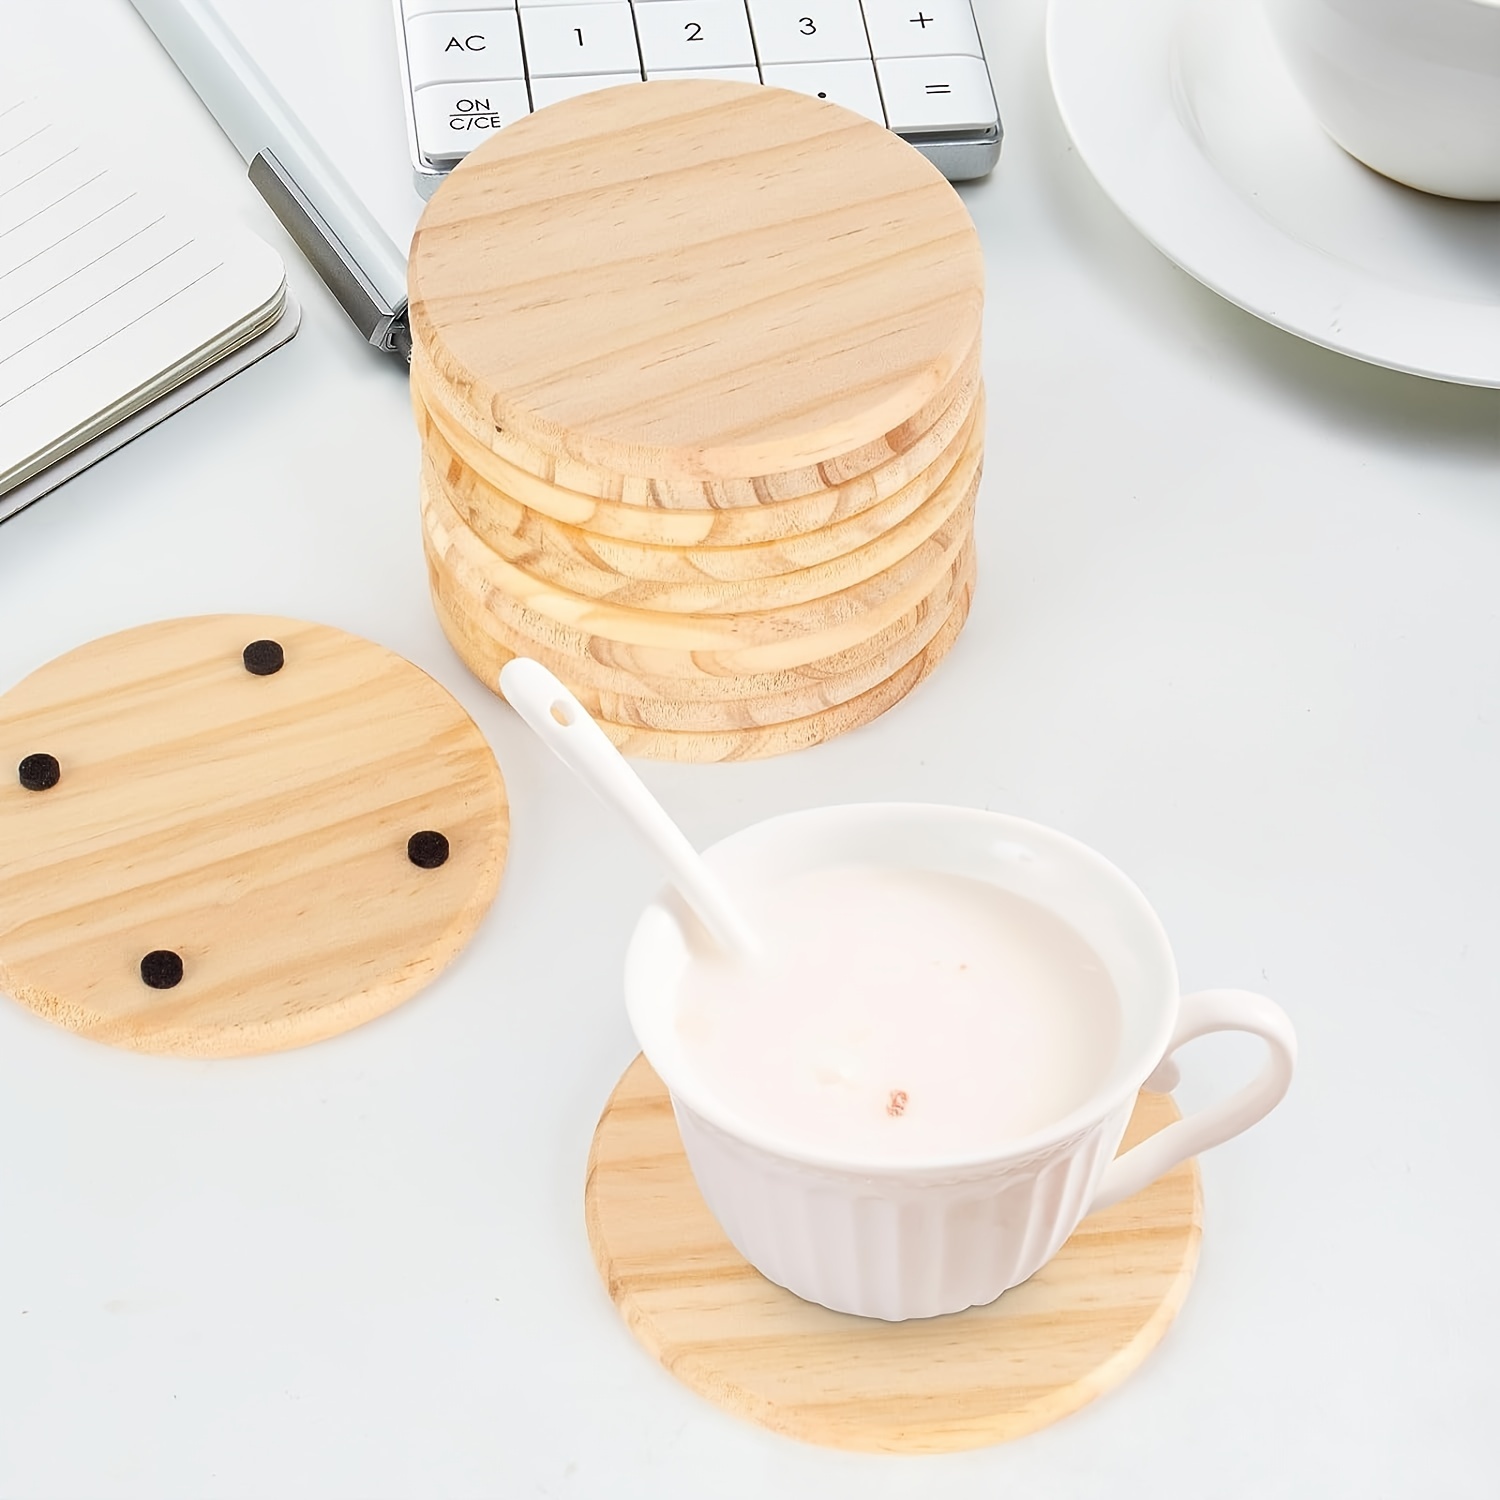 14pcs Unfinished Wood Coasters, 4 Inch Round Blank Wooden Coasters for  Crafts with Non-Slip Silicon Dots []